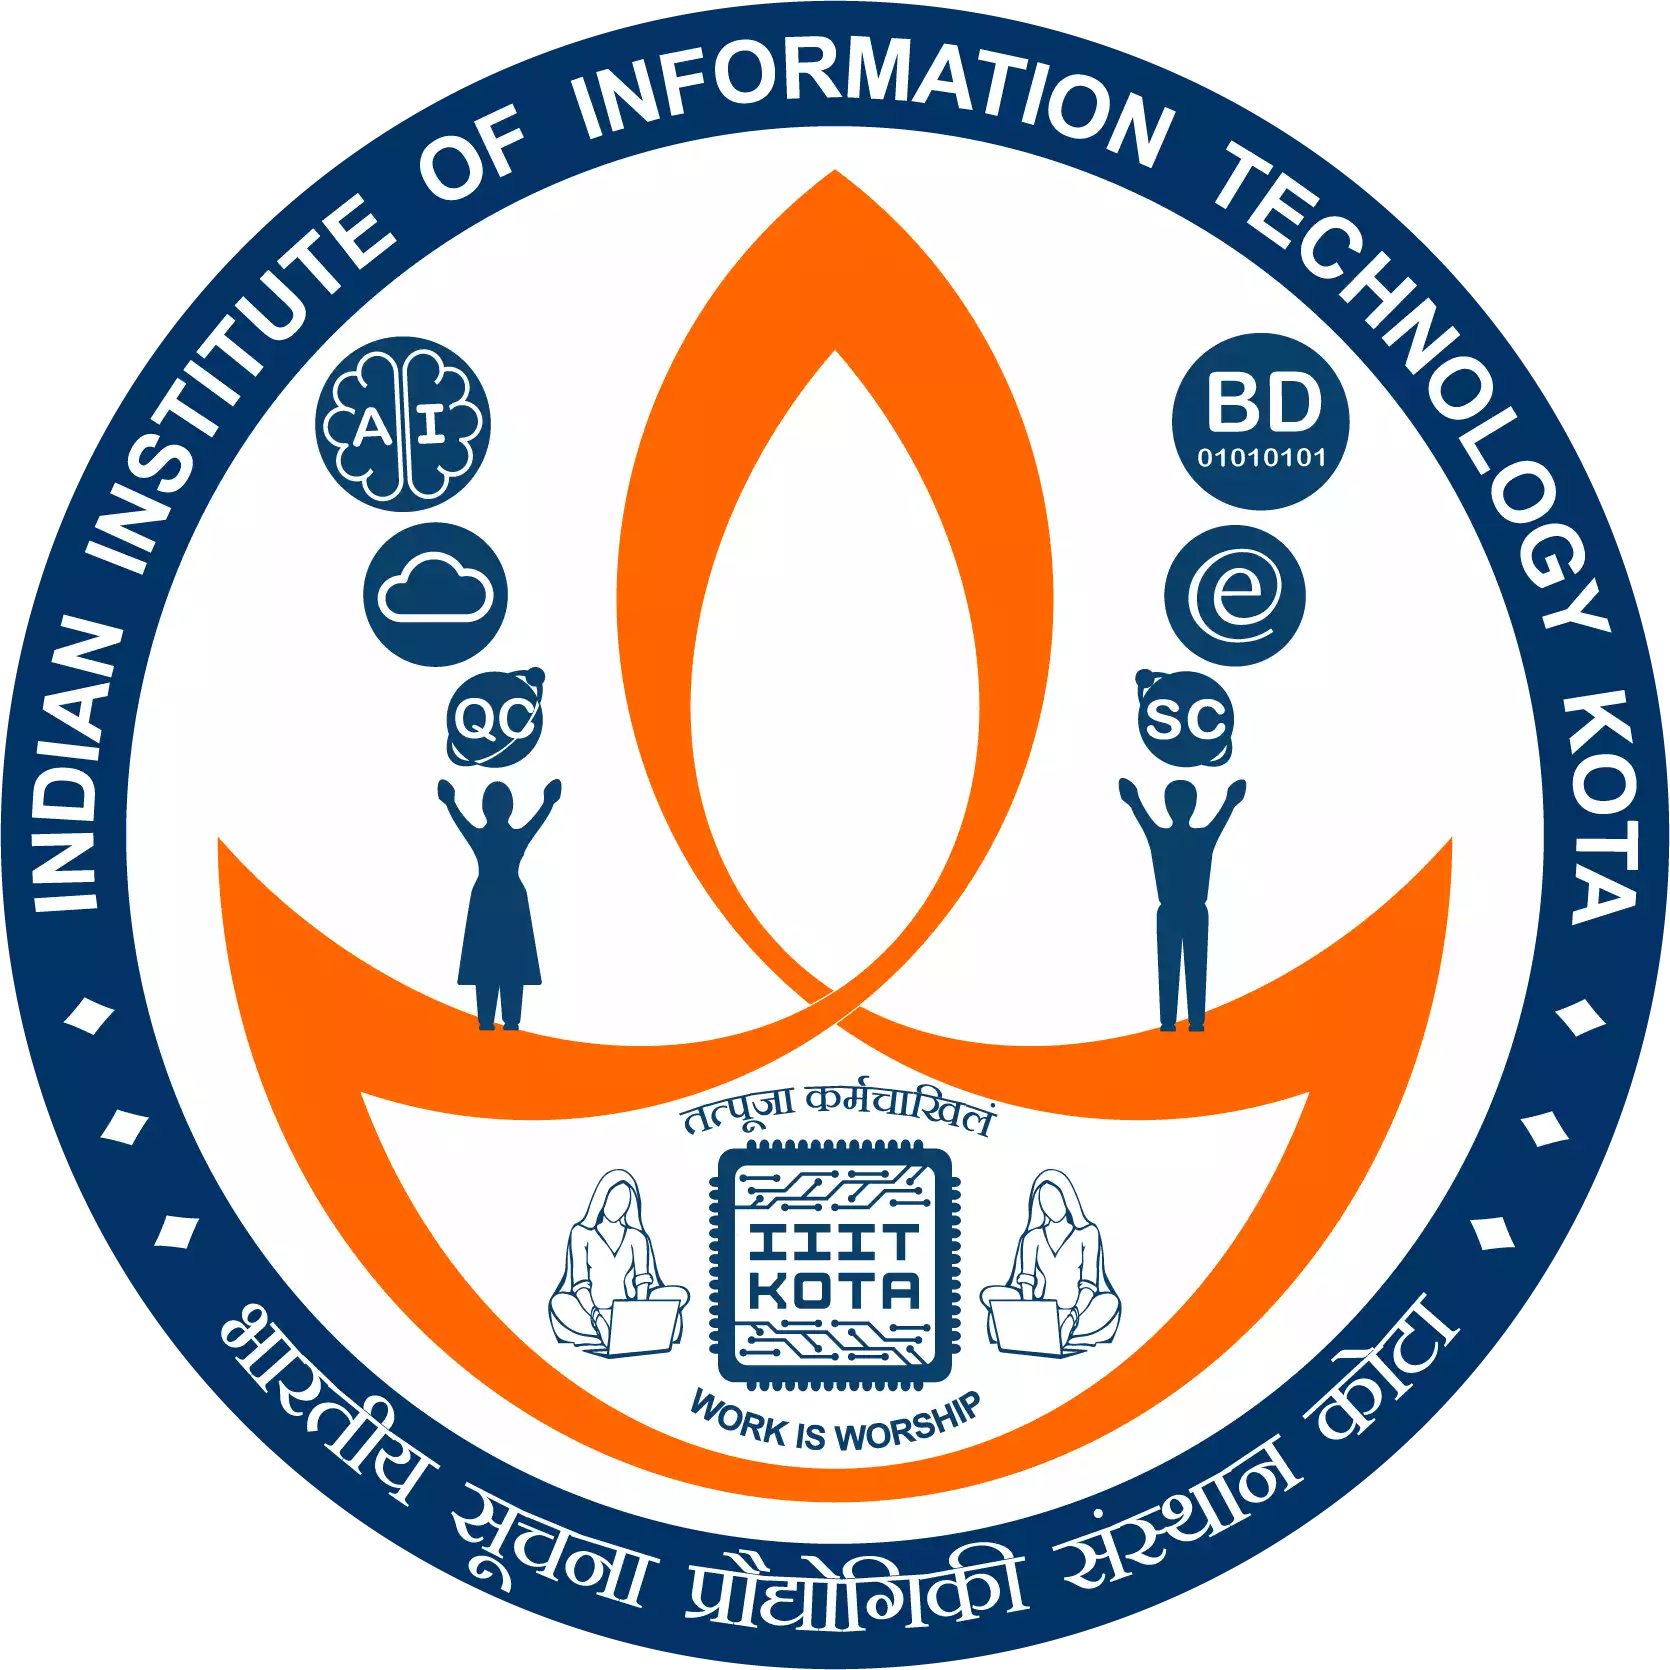 Indian Institute of Information Technology (IIIT- PPP) Kota